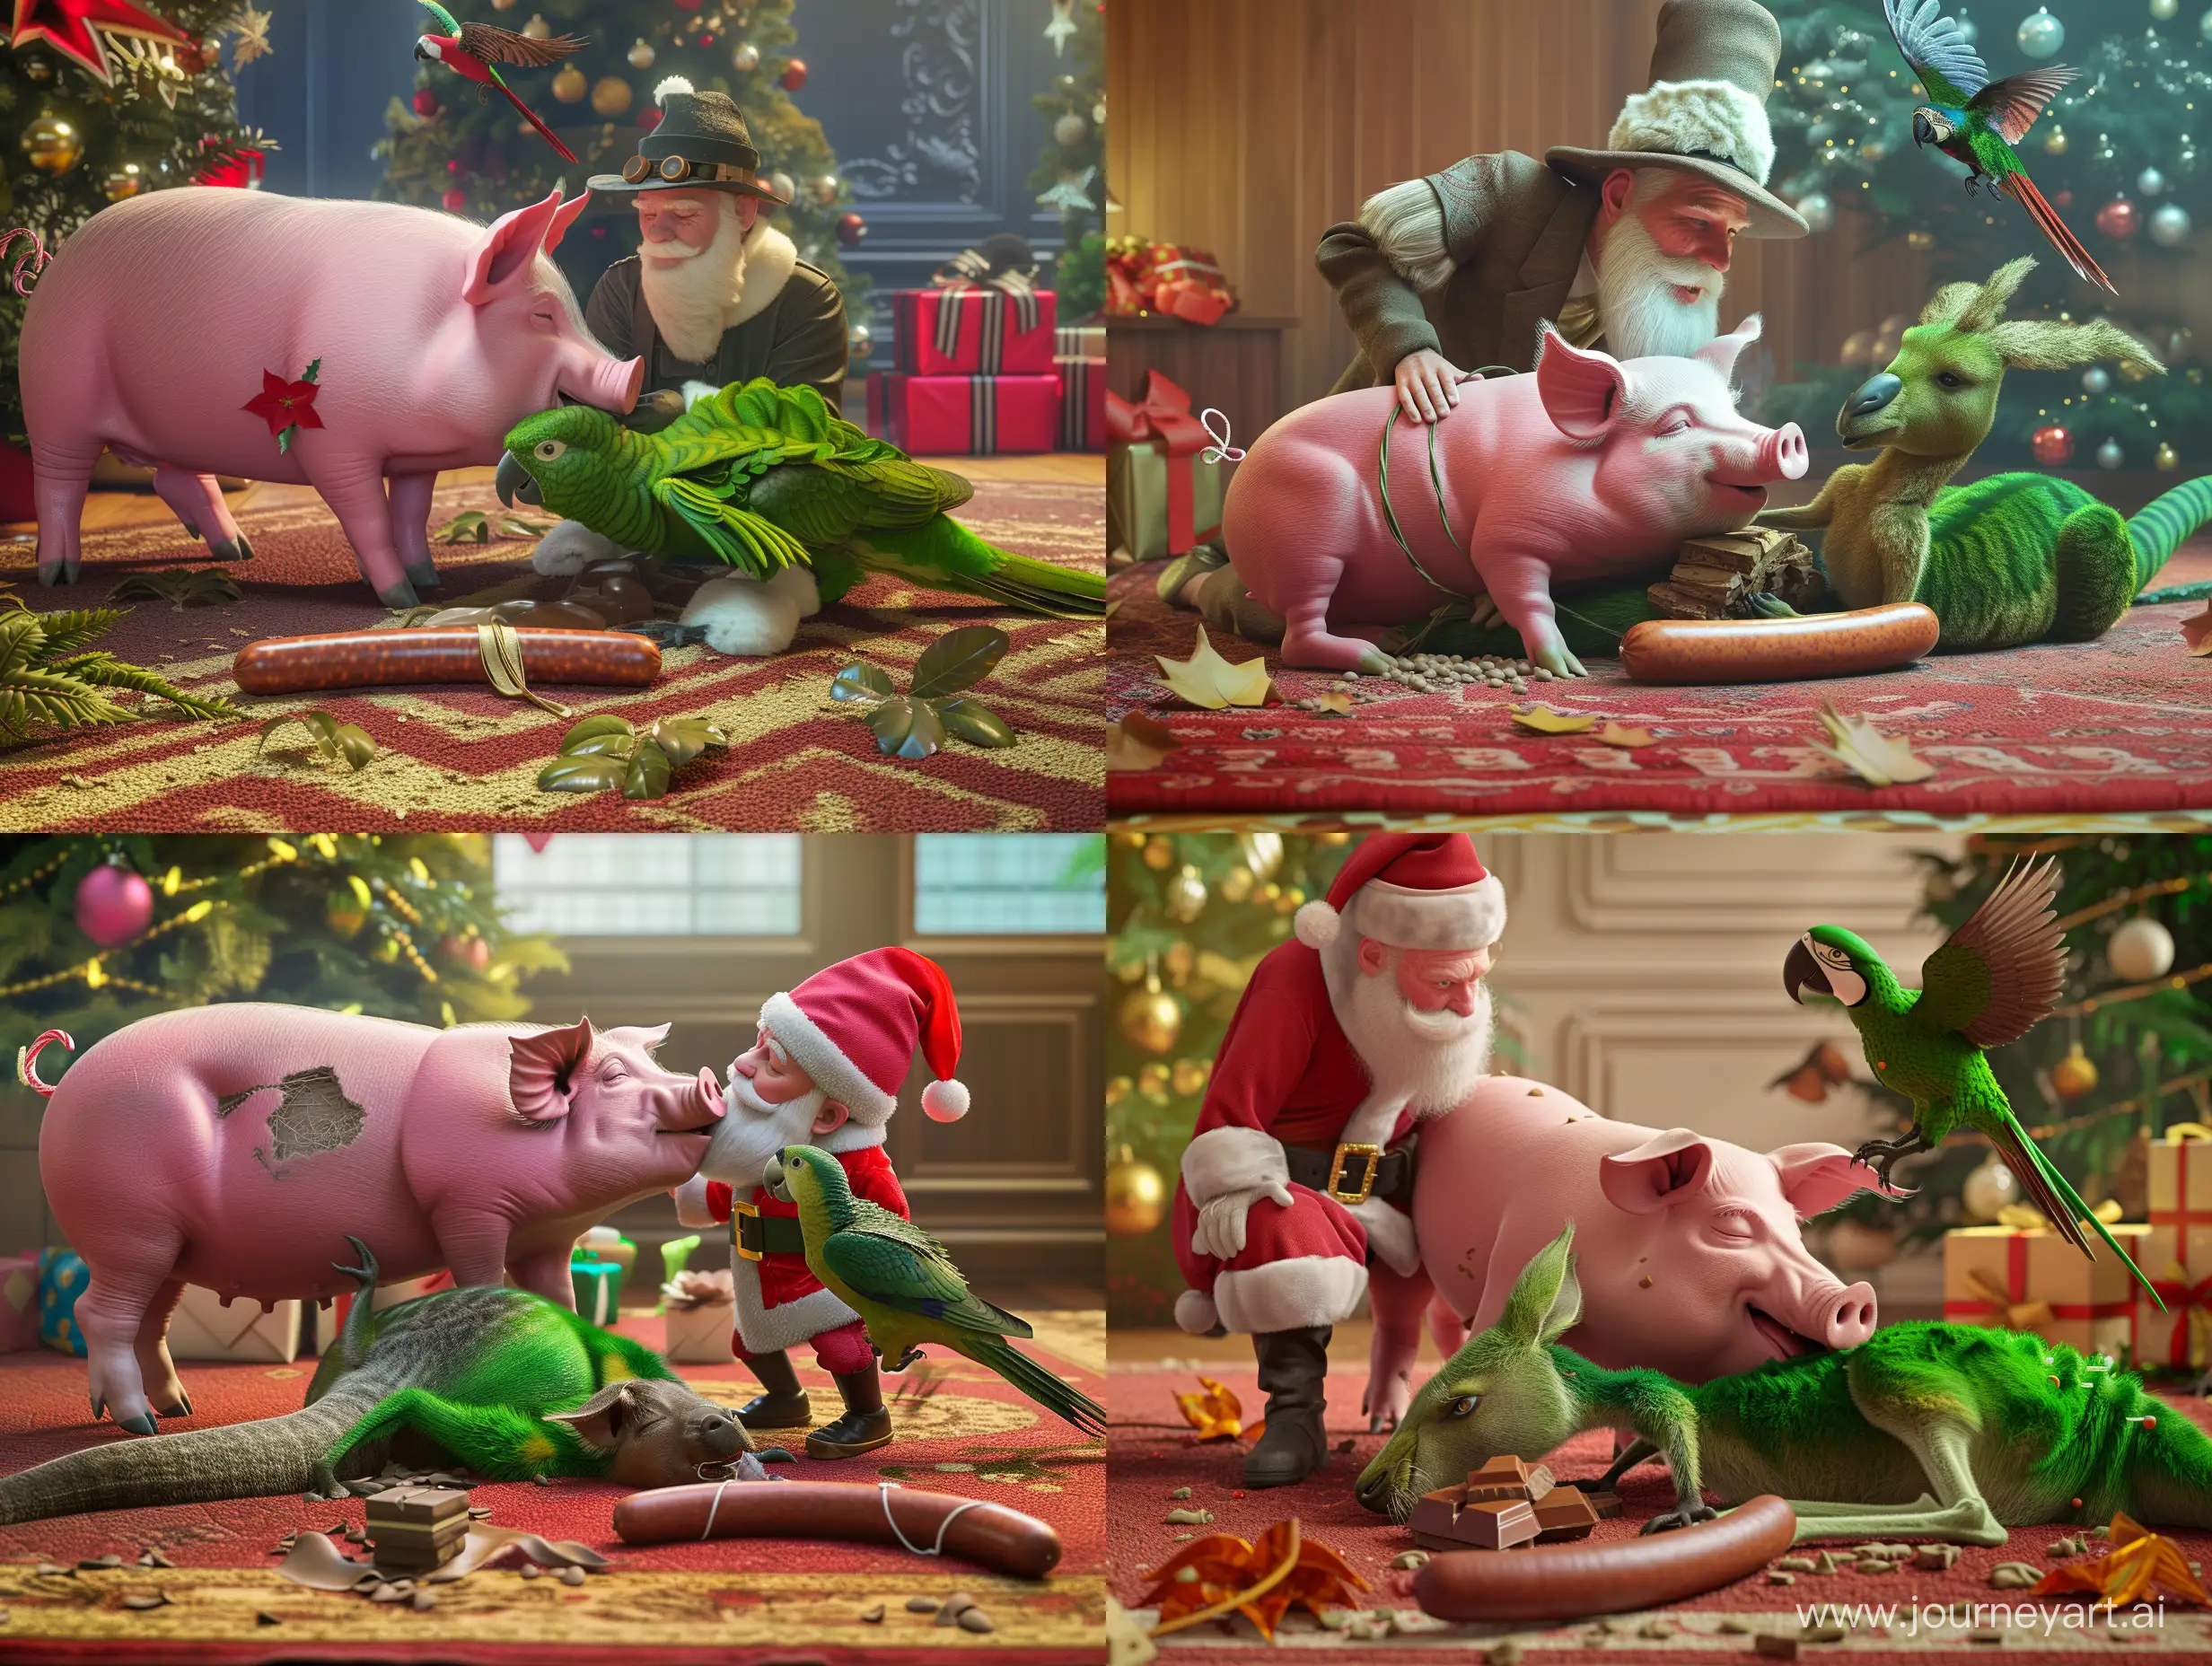 The Botanical Garden. A pink pig kisses a green kangaroo lying on the carpet. Santa Claus is standing next to him in a hat and scratching his sausage, which is tied to his leg. The parrot flies over them and squeezes out cakes of chocolate that spreads all over them. ultrarealism in 8k. unreal engine